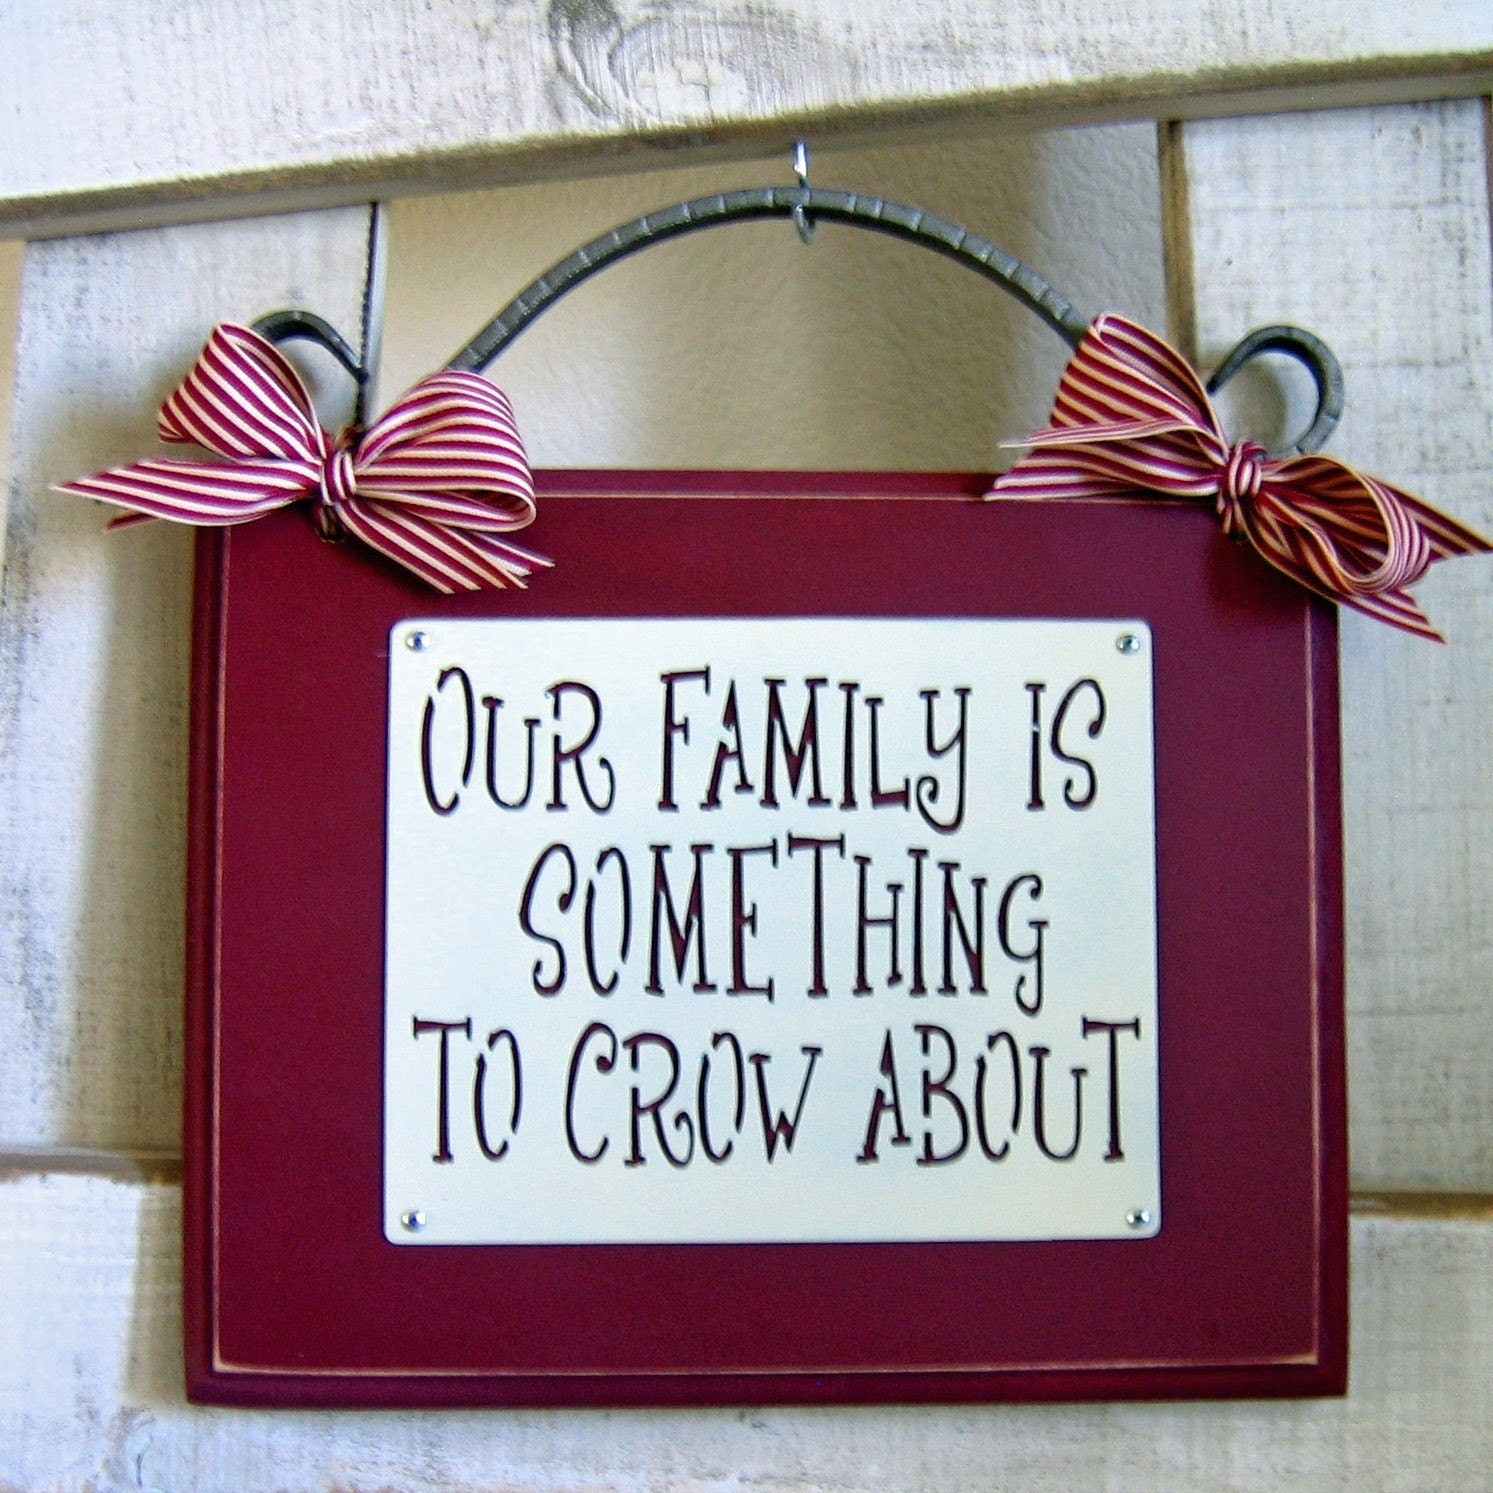 Our Family Is Something To Crow About Metal on Wood Plaque